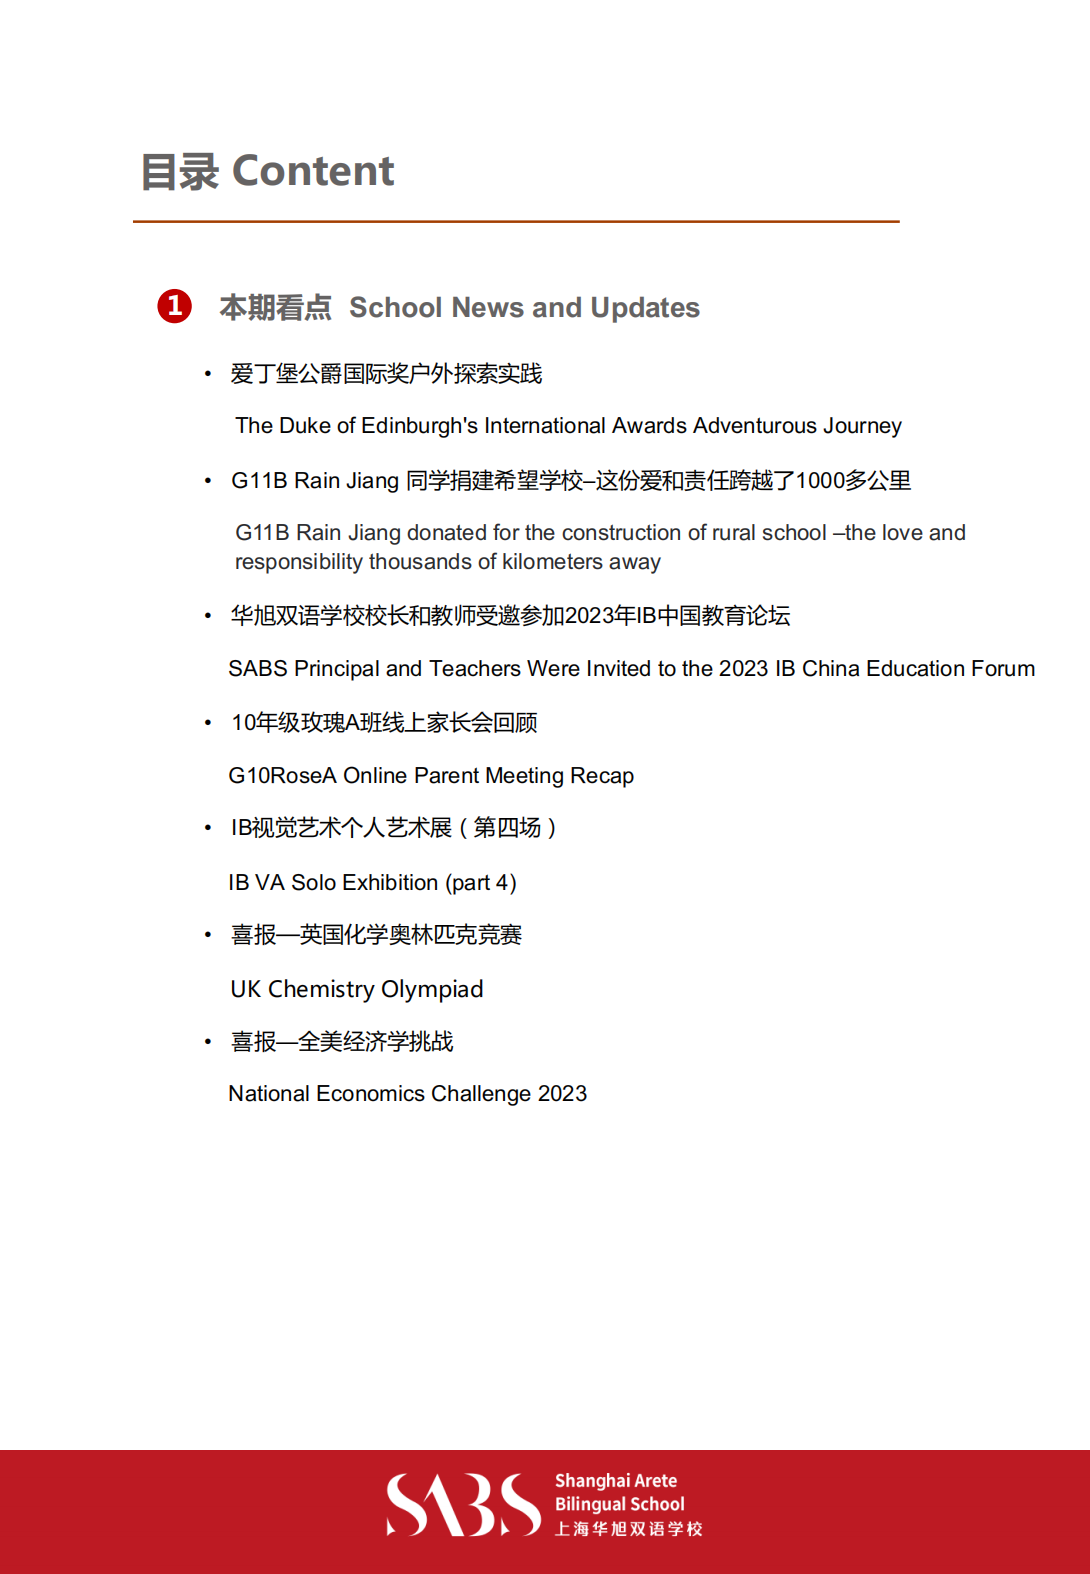 HS 5th Issue Newsletter pptx（Chinese)_01.png